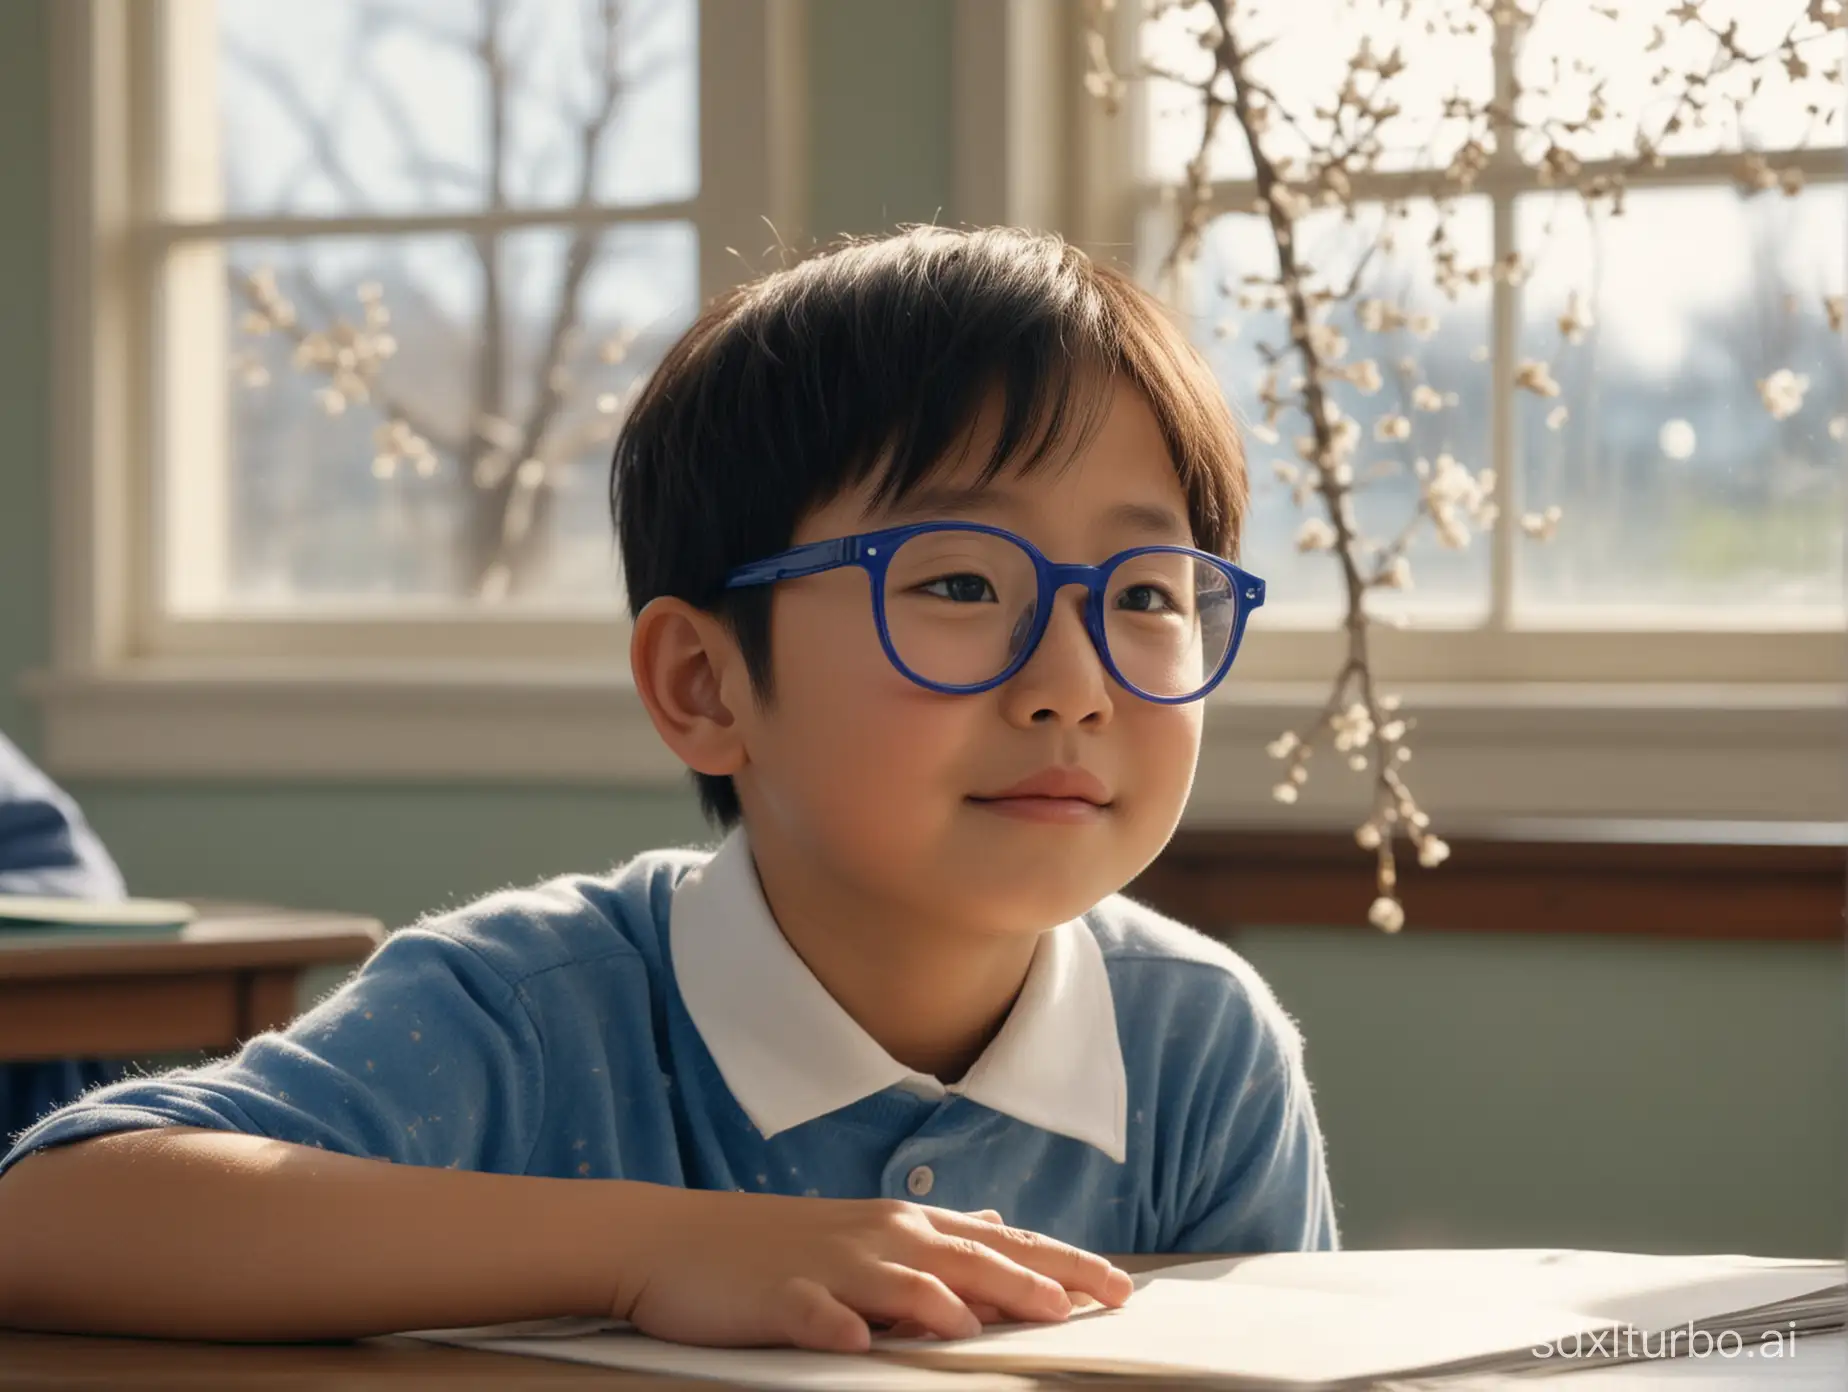 A short hair little Asian boy sits in the classroom by the window. wearing blue glasses, He turns his head to look outside, where a 1997 spring scene unfolds: willow branches sway and swallows frolic in the sky